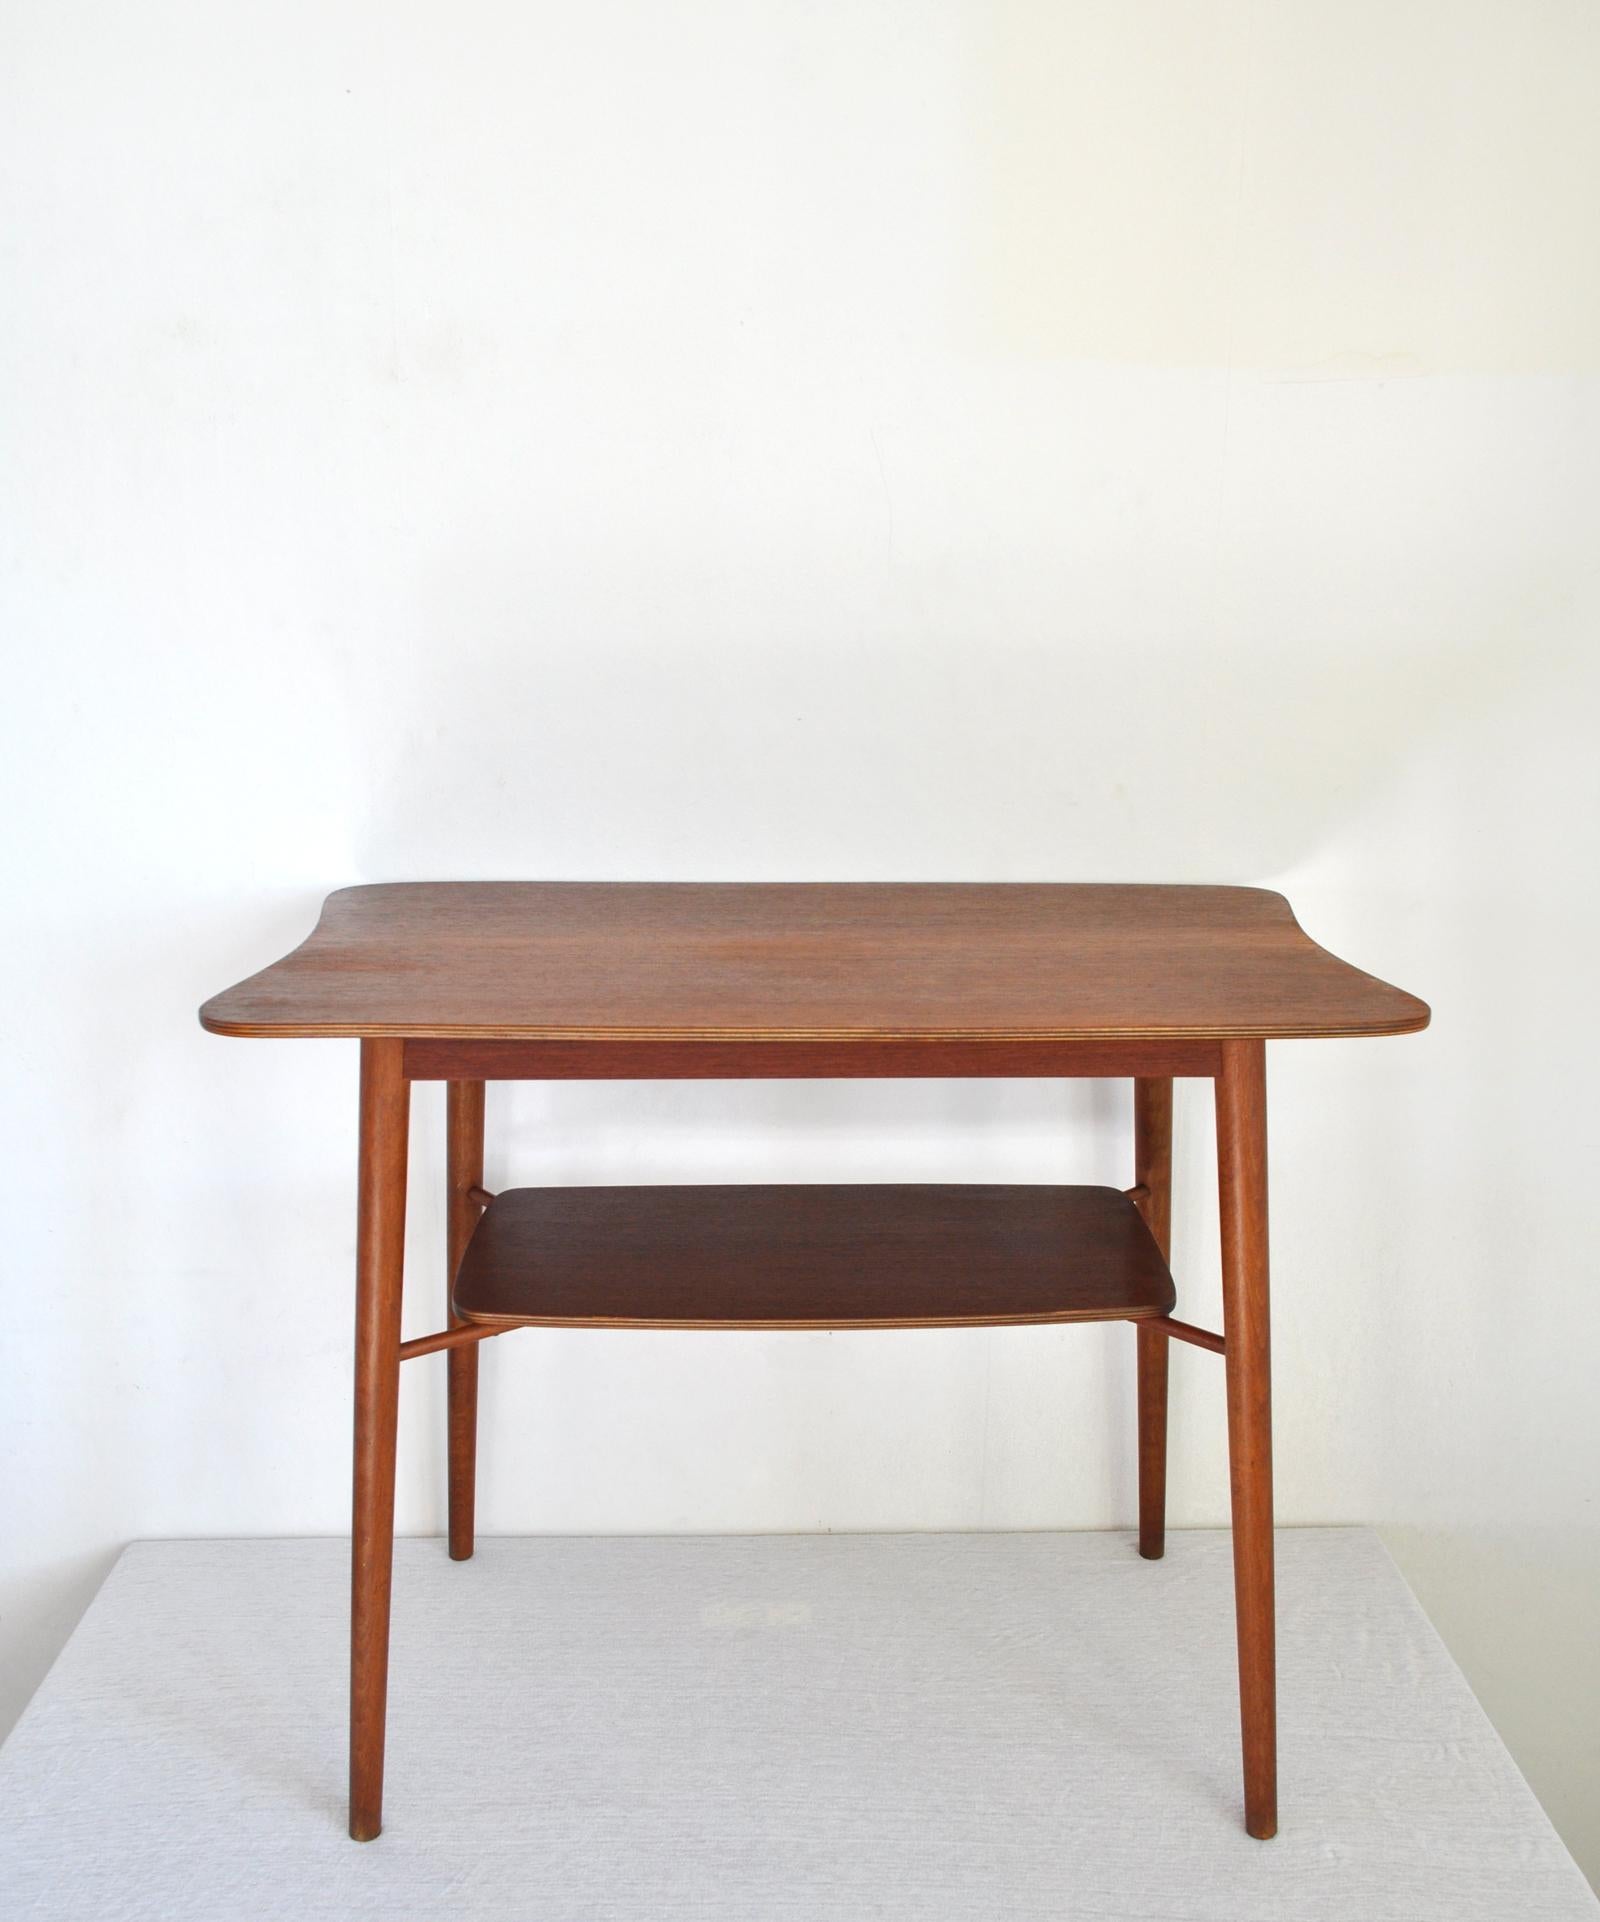 Danish Midcentury Occasional Teak Side Table with a Organic Shape, 1960s